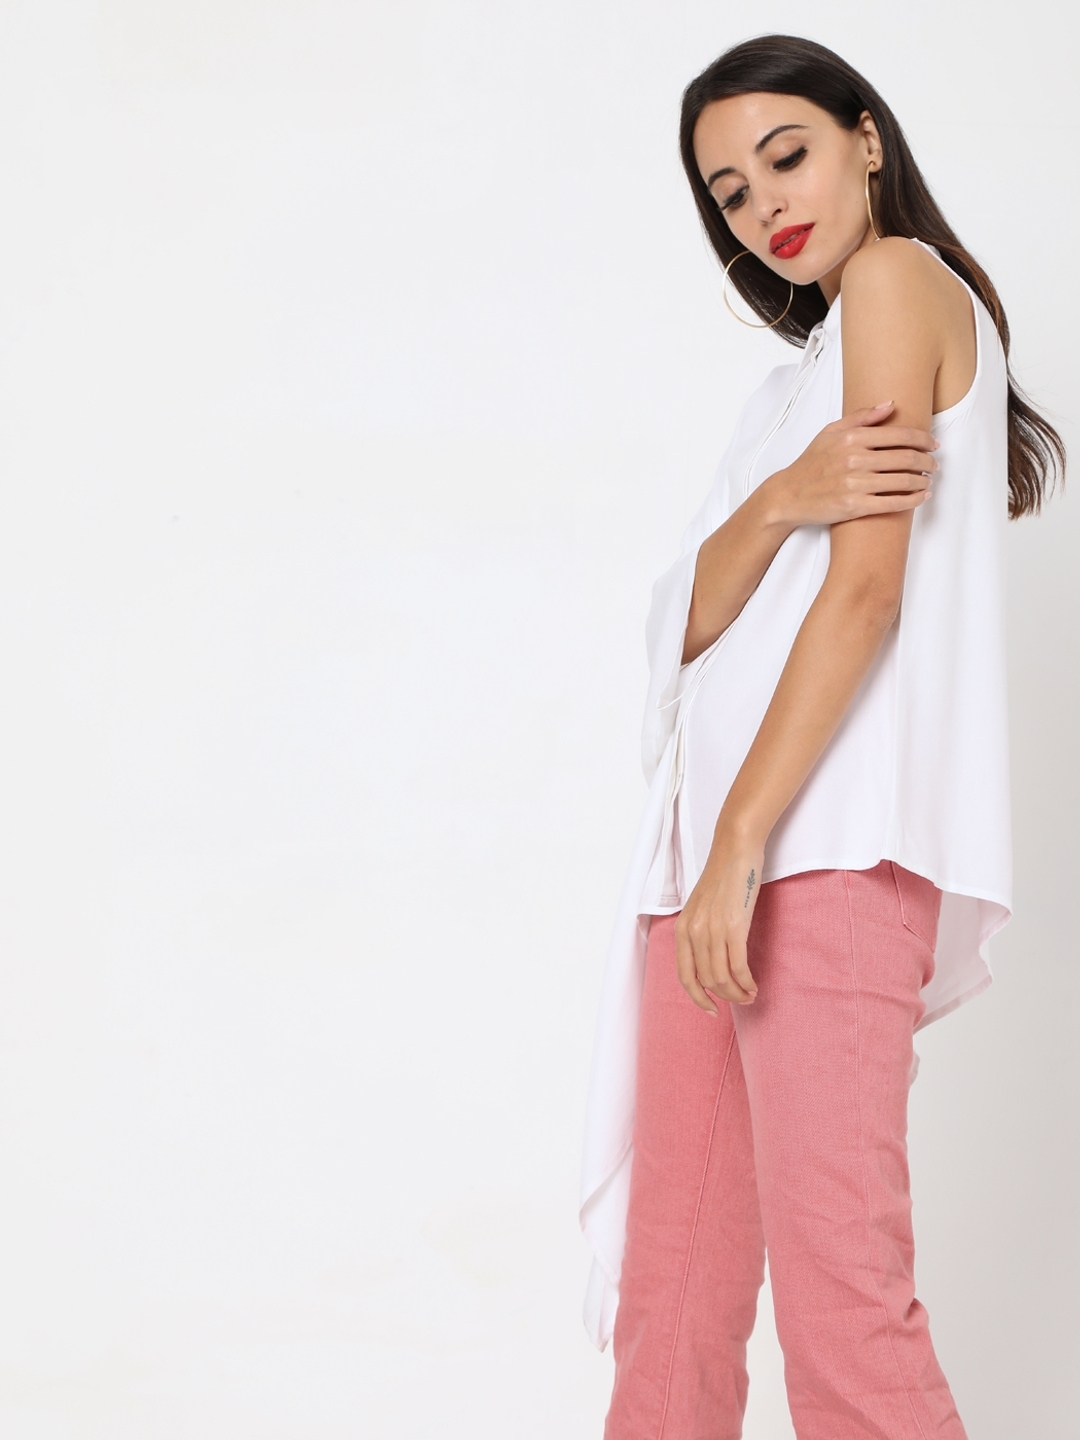 Asymmetrical Shirt with Concealed Button Placket